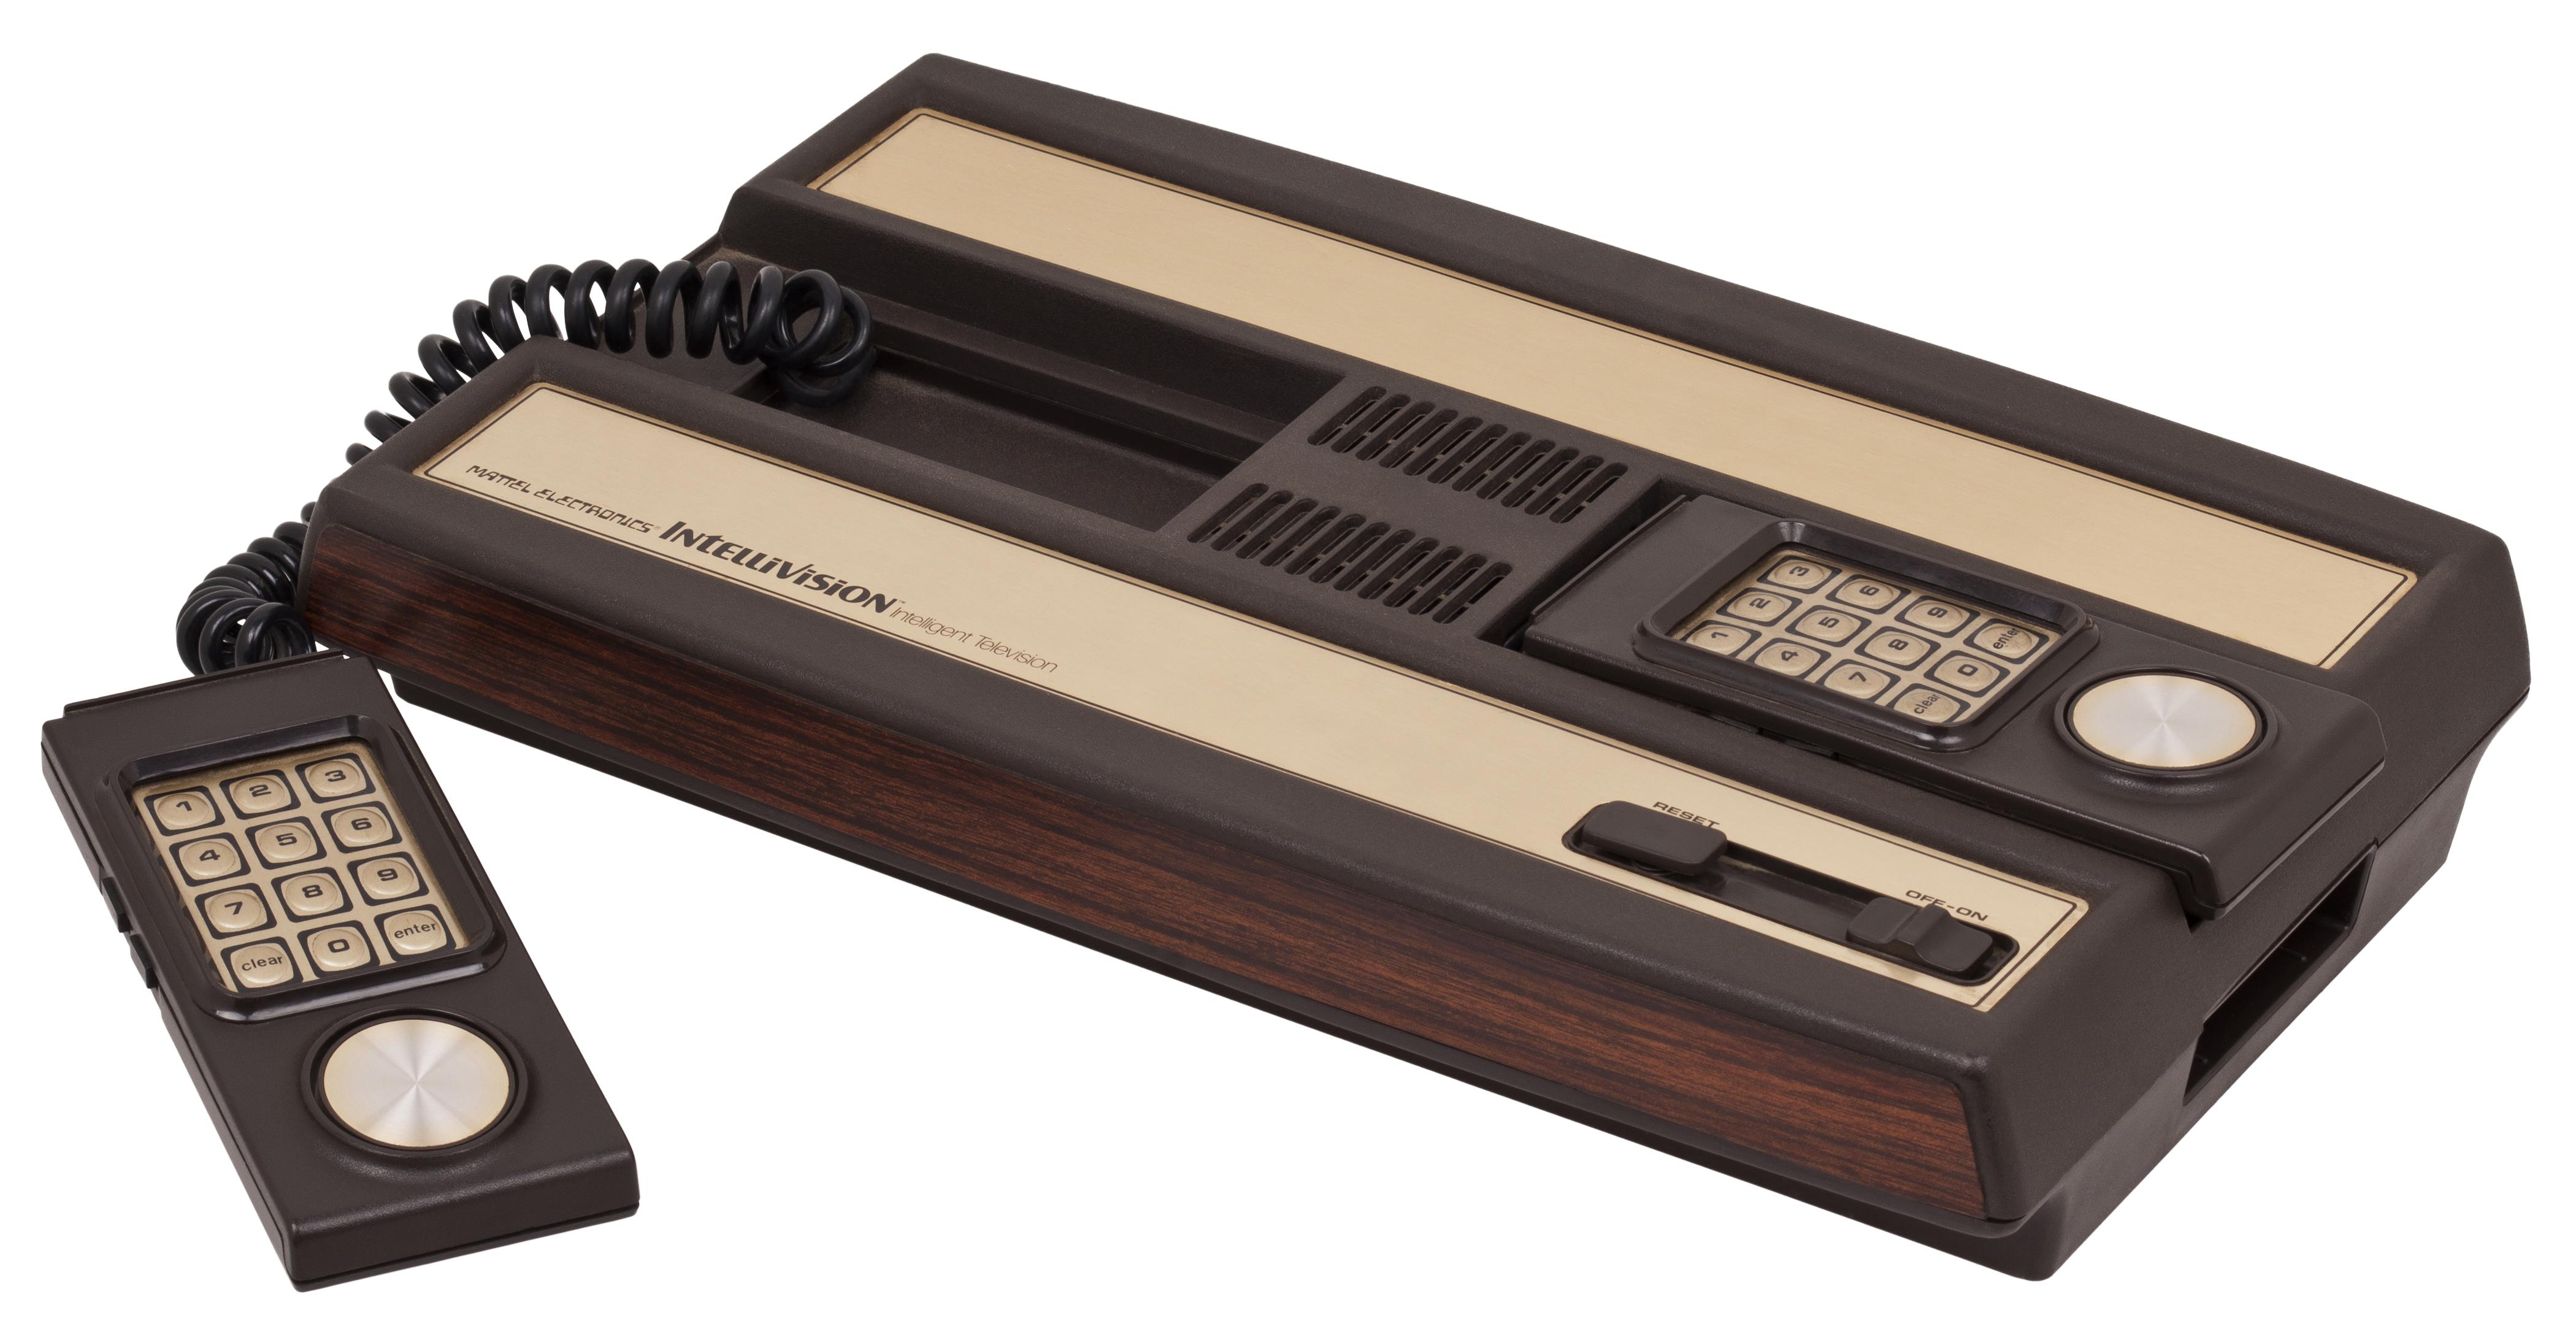 The Mattel Intellivision home console and controoler.